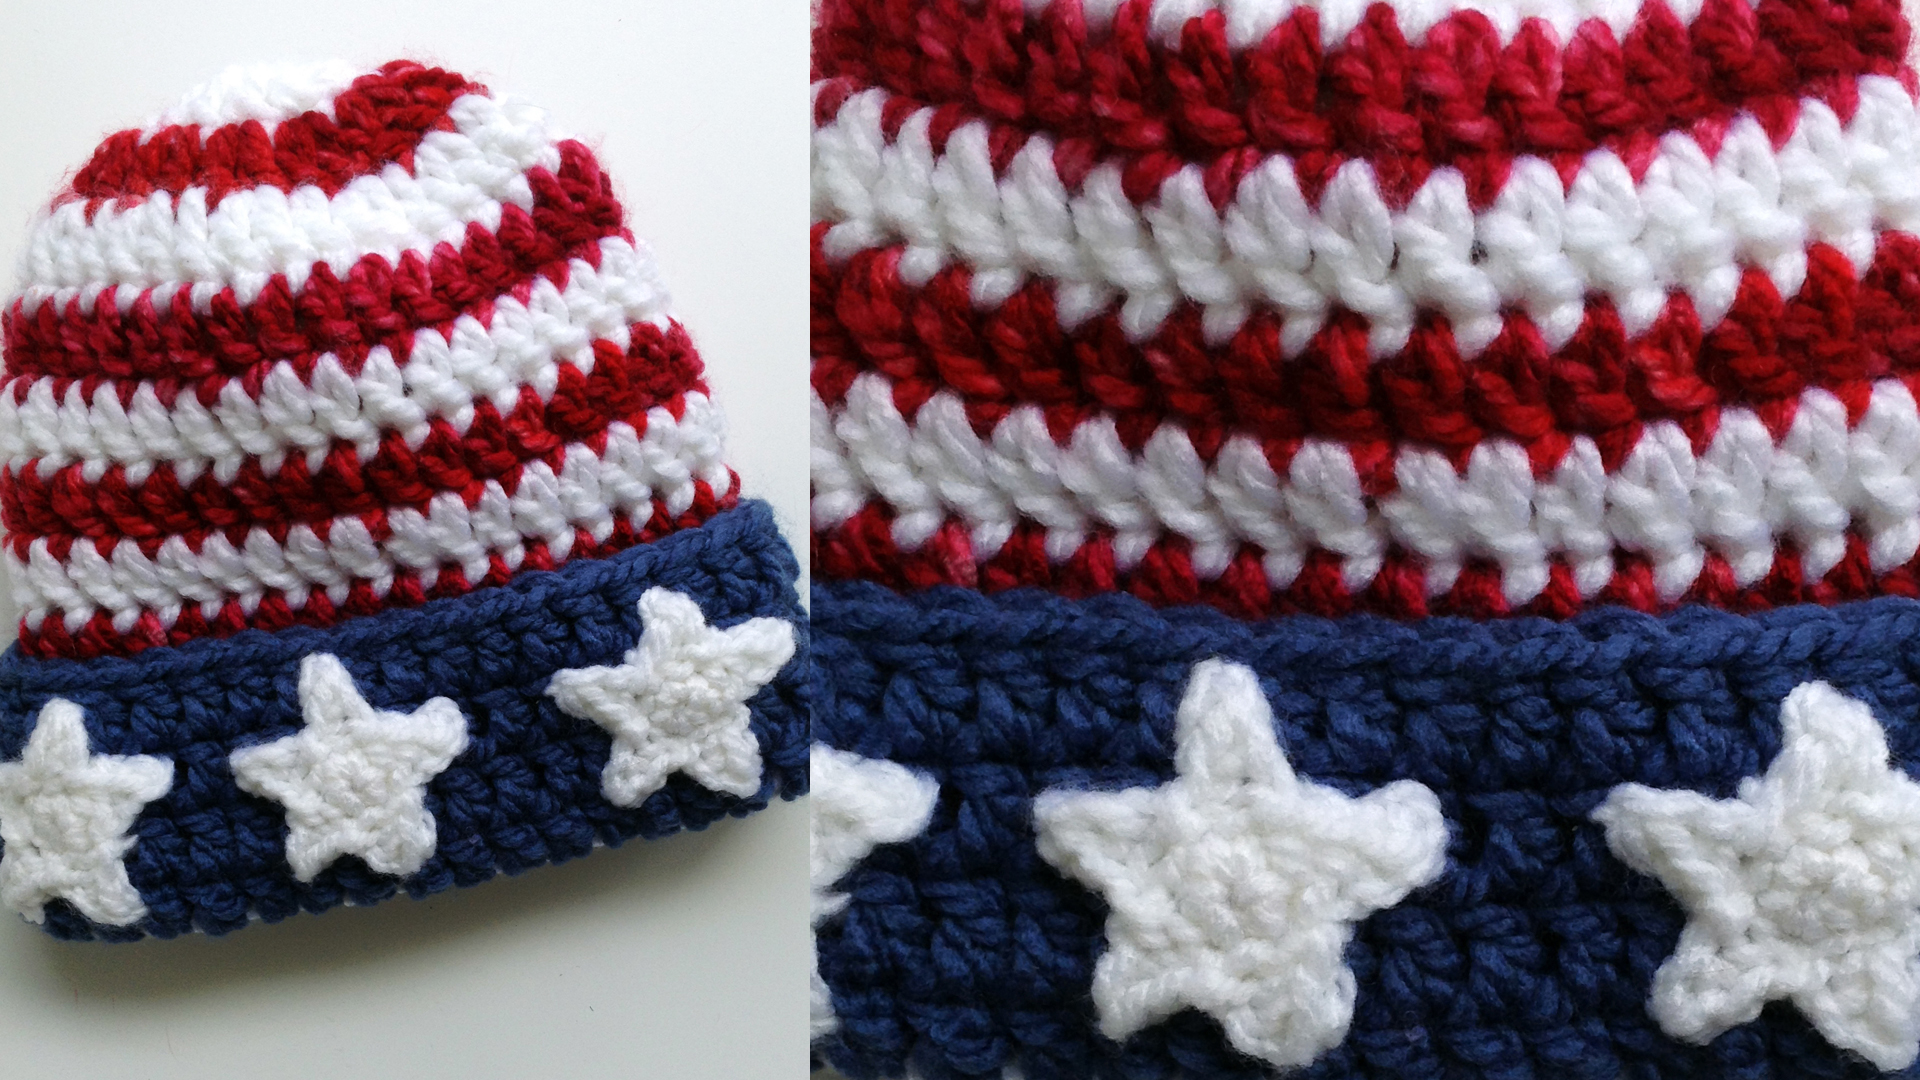 maggies-crochet-4th-of-july-hat-free-pattern-close-up